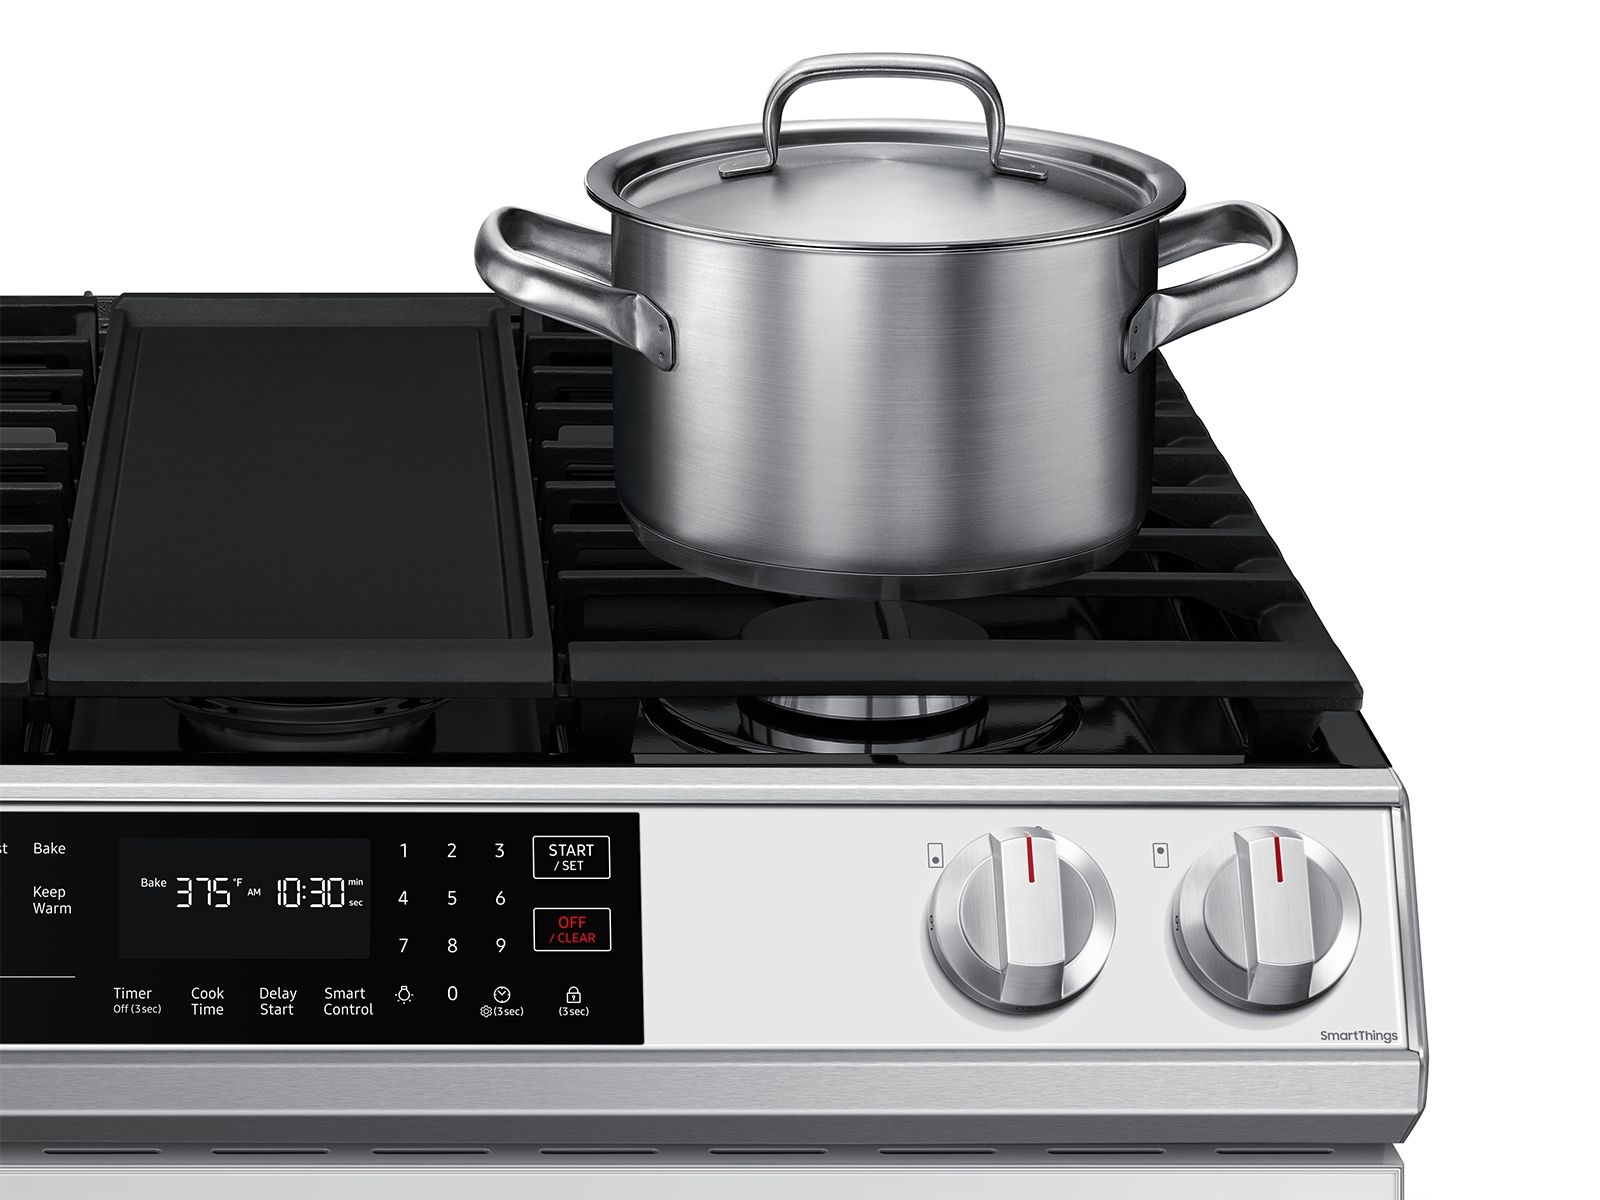 The Top 10 Must-Have Kitchen Appliances of 2023, by Michaela